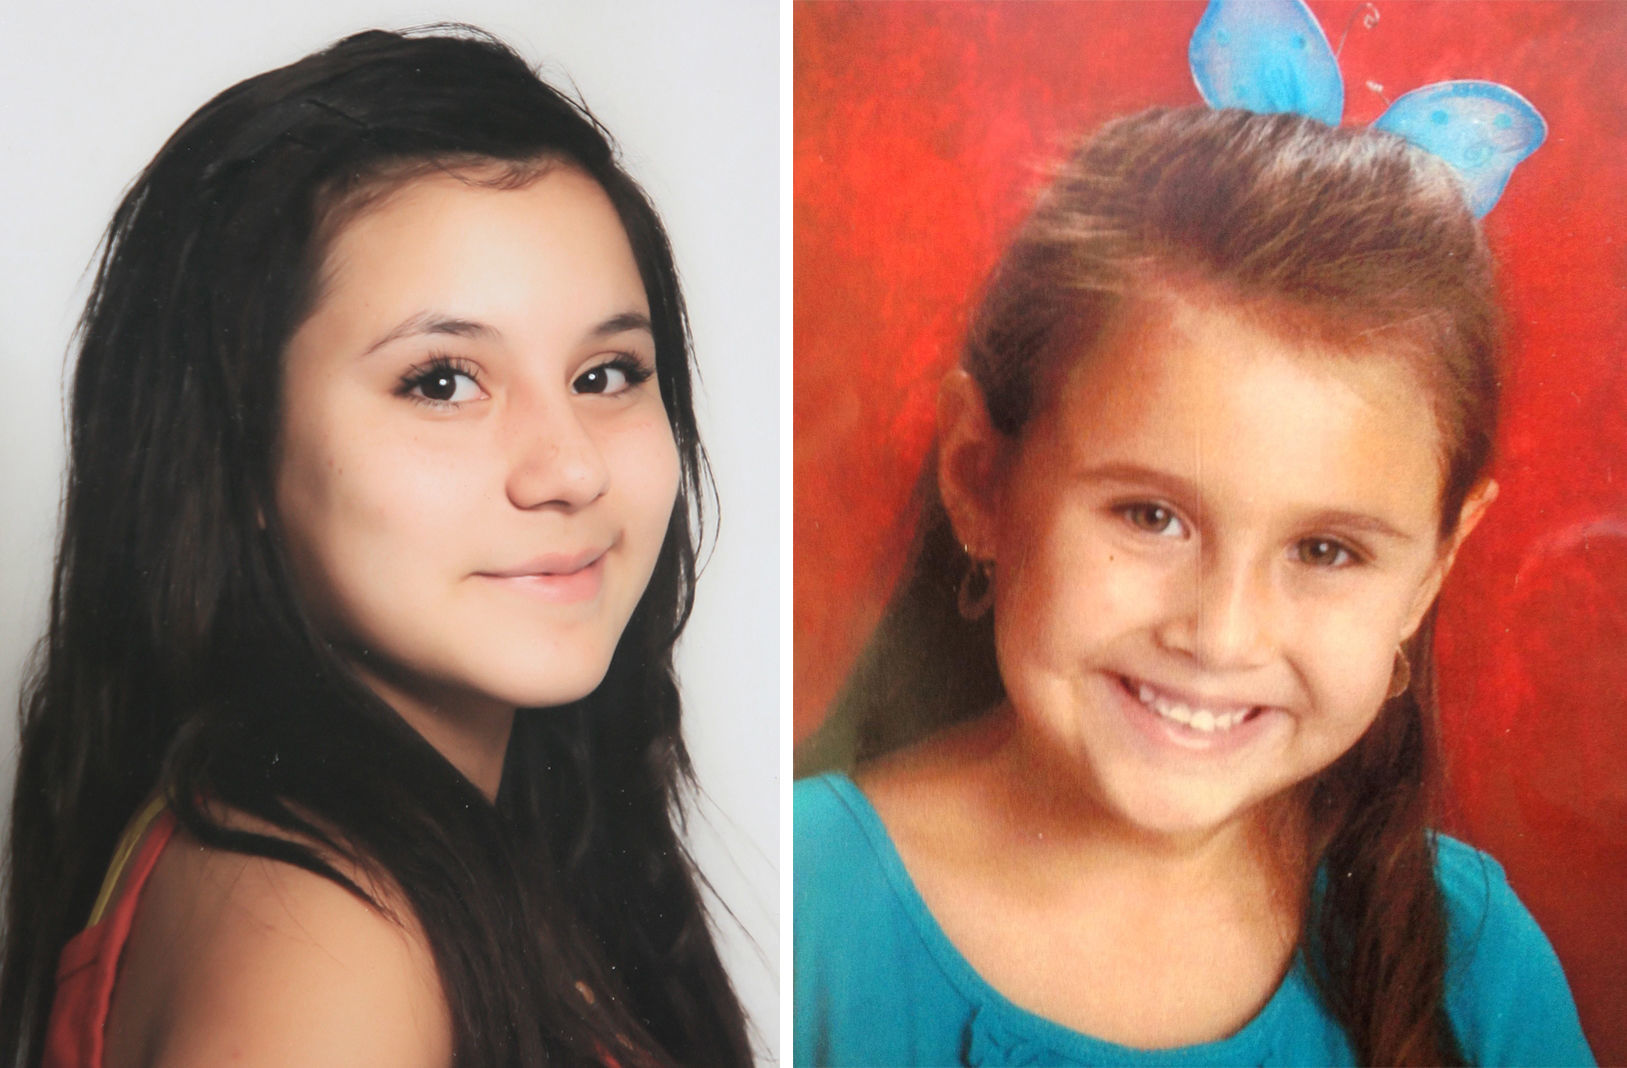 Trial begins Tuesday for man accused of killing 2 Tucson girls picture